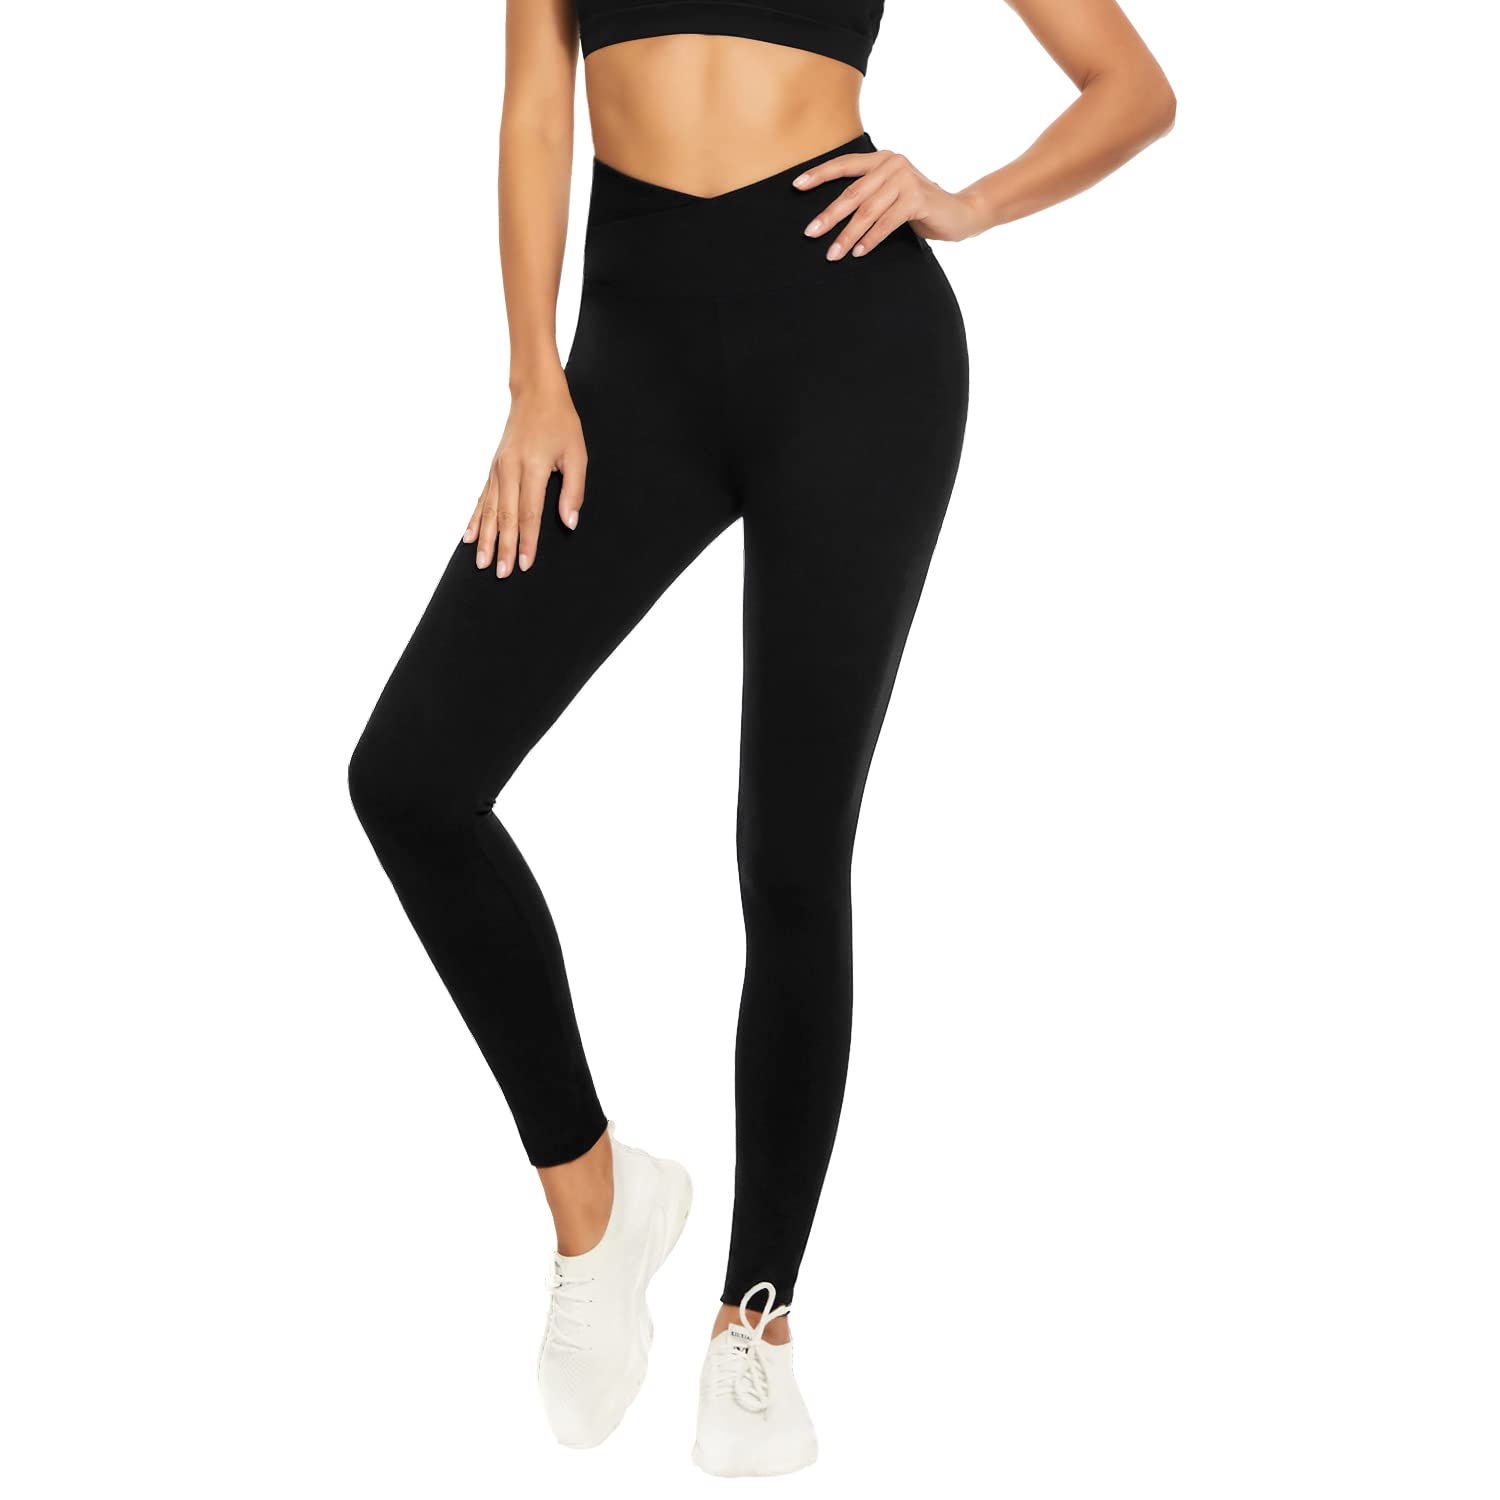 leggings cross women, leggings cross women Suppliers and